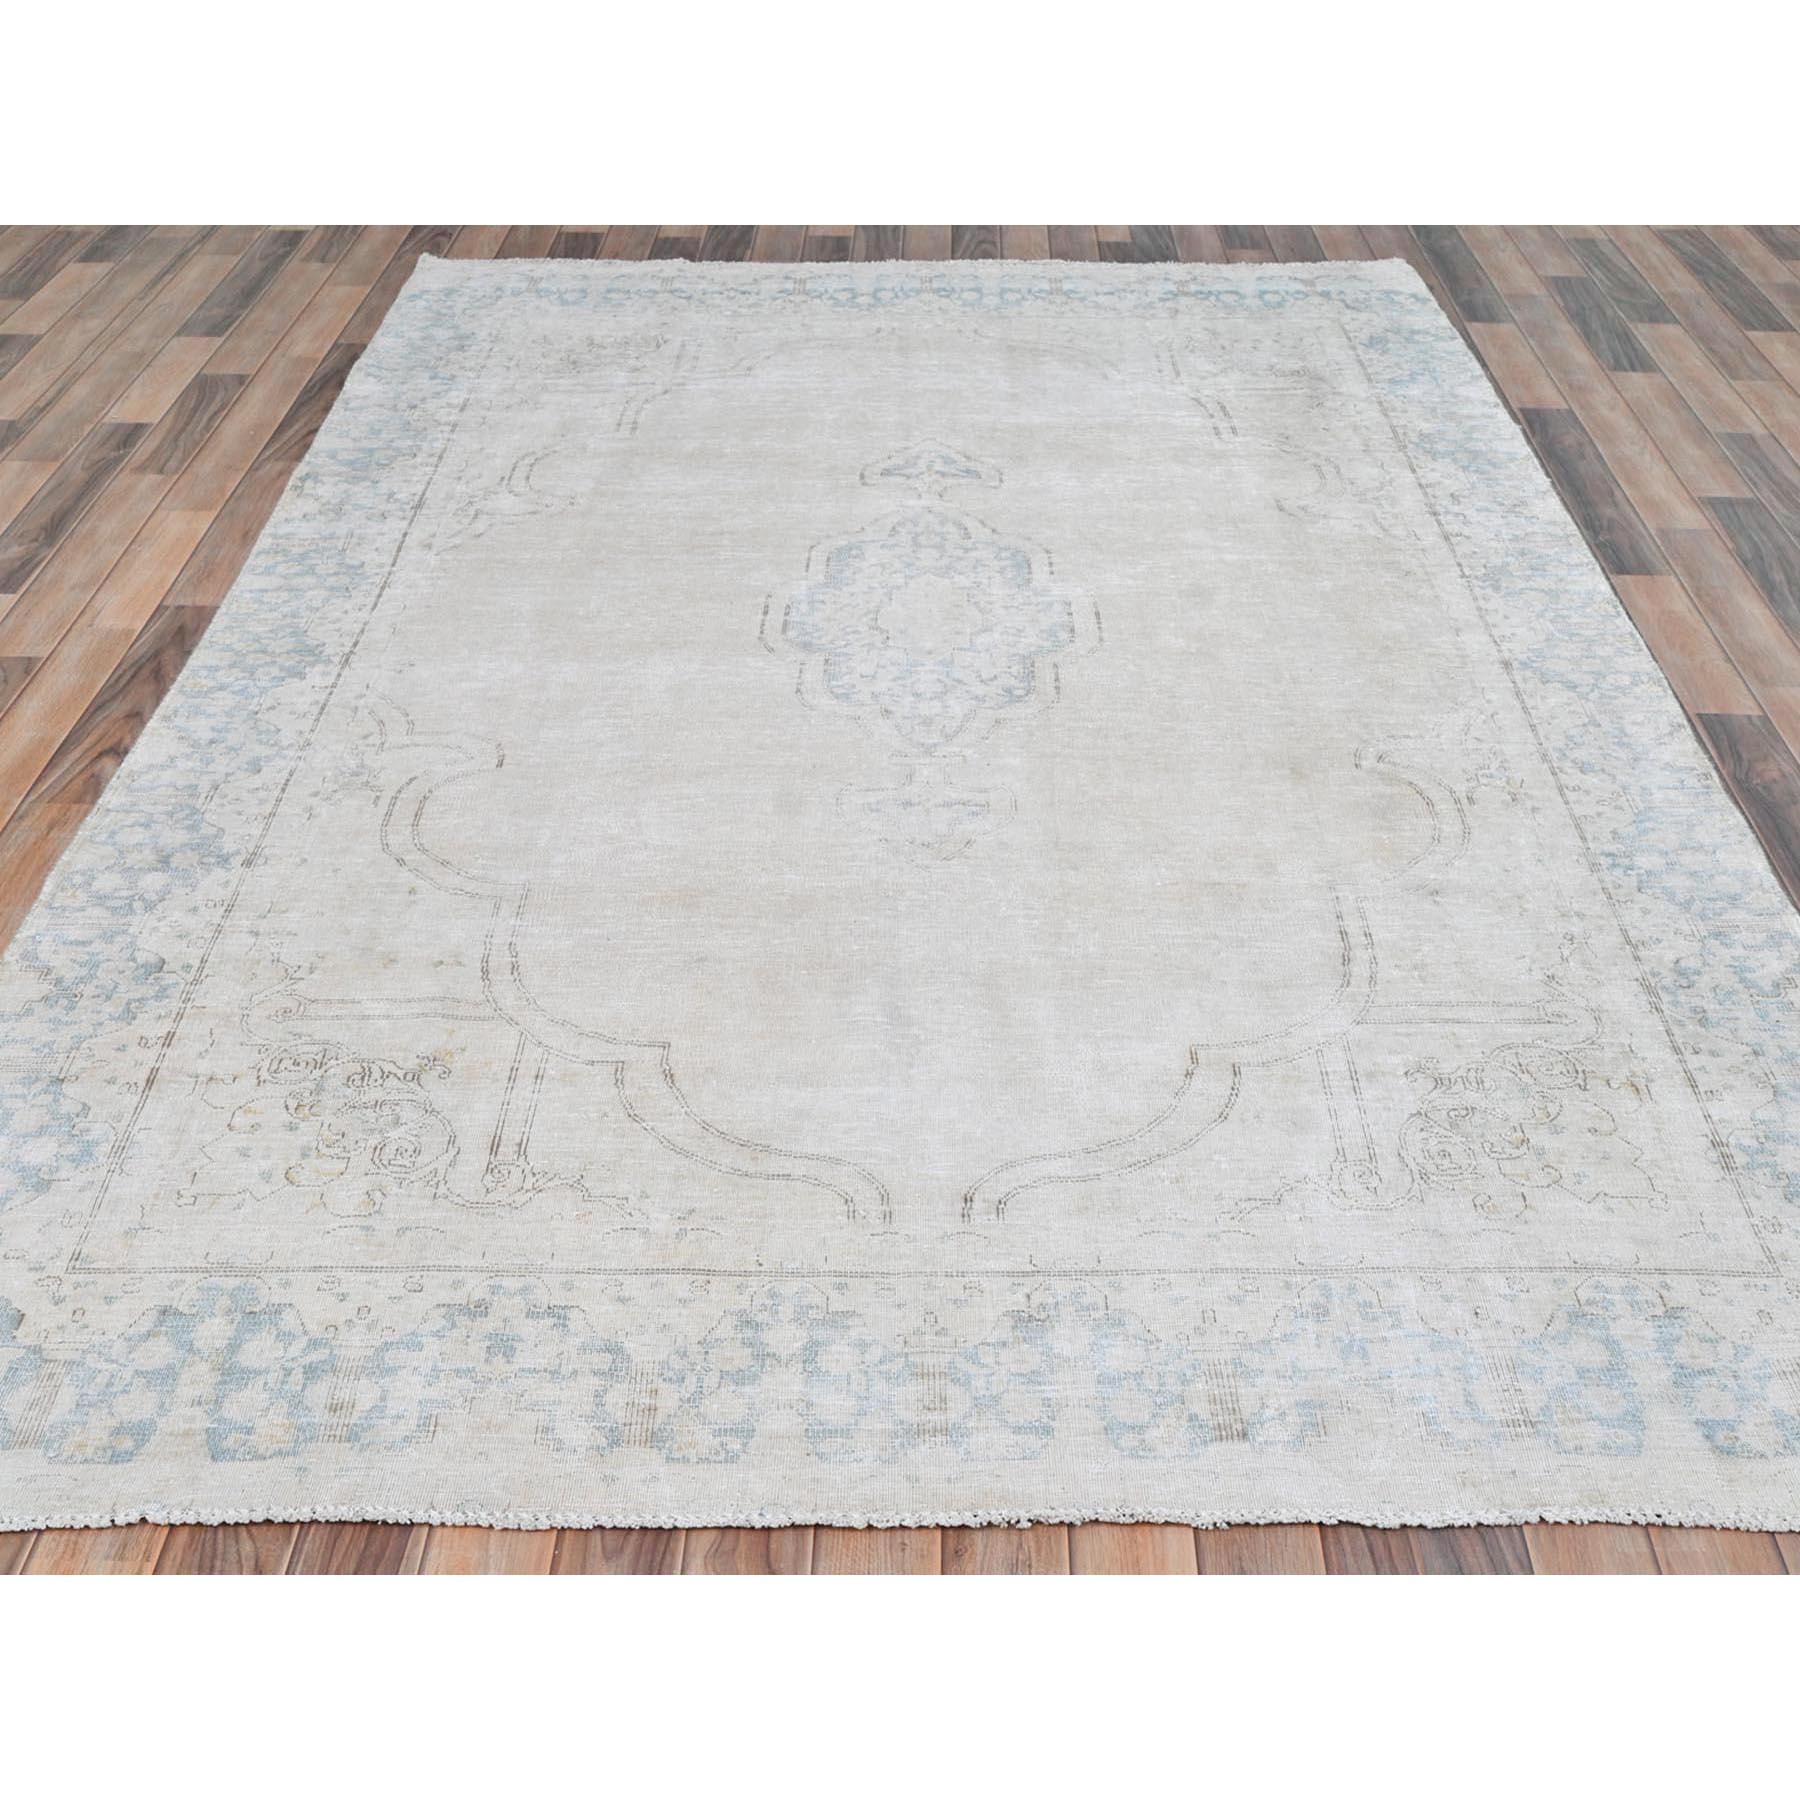 Medieval Ivory Worn Wool Hand Knotted Old Persian Kerman Cropped Thin Distressed Look Rug For Sale